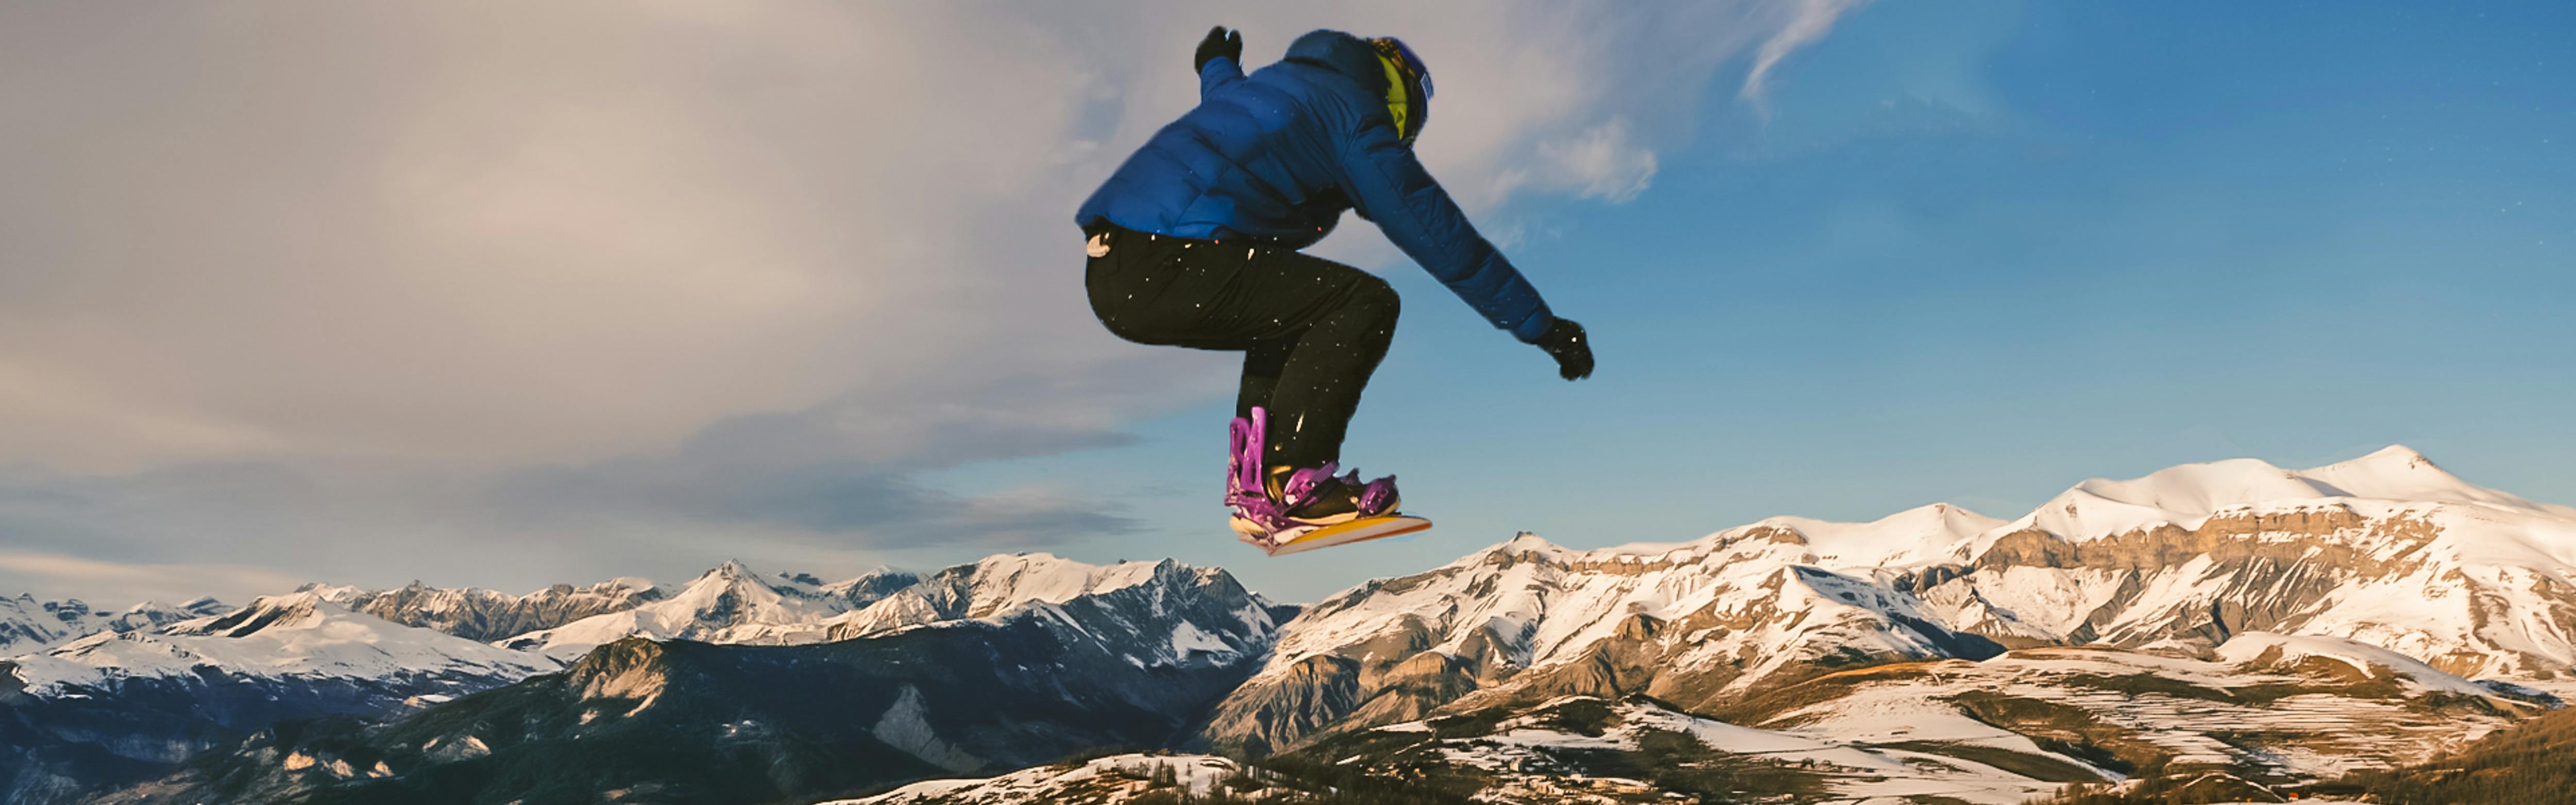 A snowboarder jumps and a mountain range opens up in front of him. 